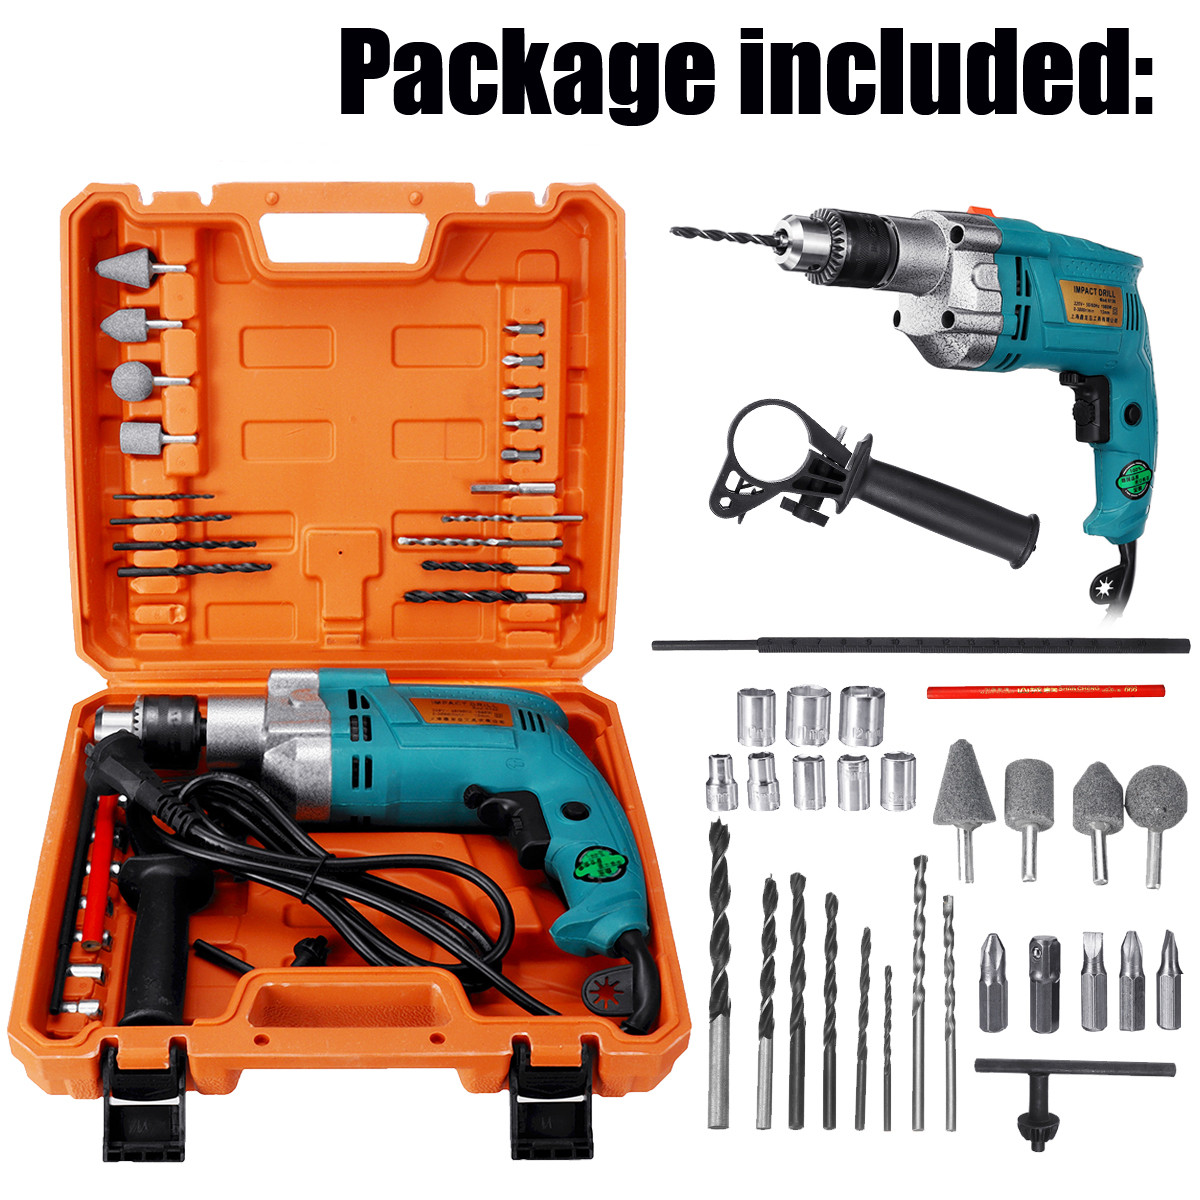 32Pcs-Set-1980W-3800RPM-Electric-Impact-Drill-Screwdriver-Household-Electric-Flat-Drill-Grinding-1466059-10